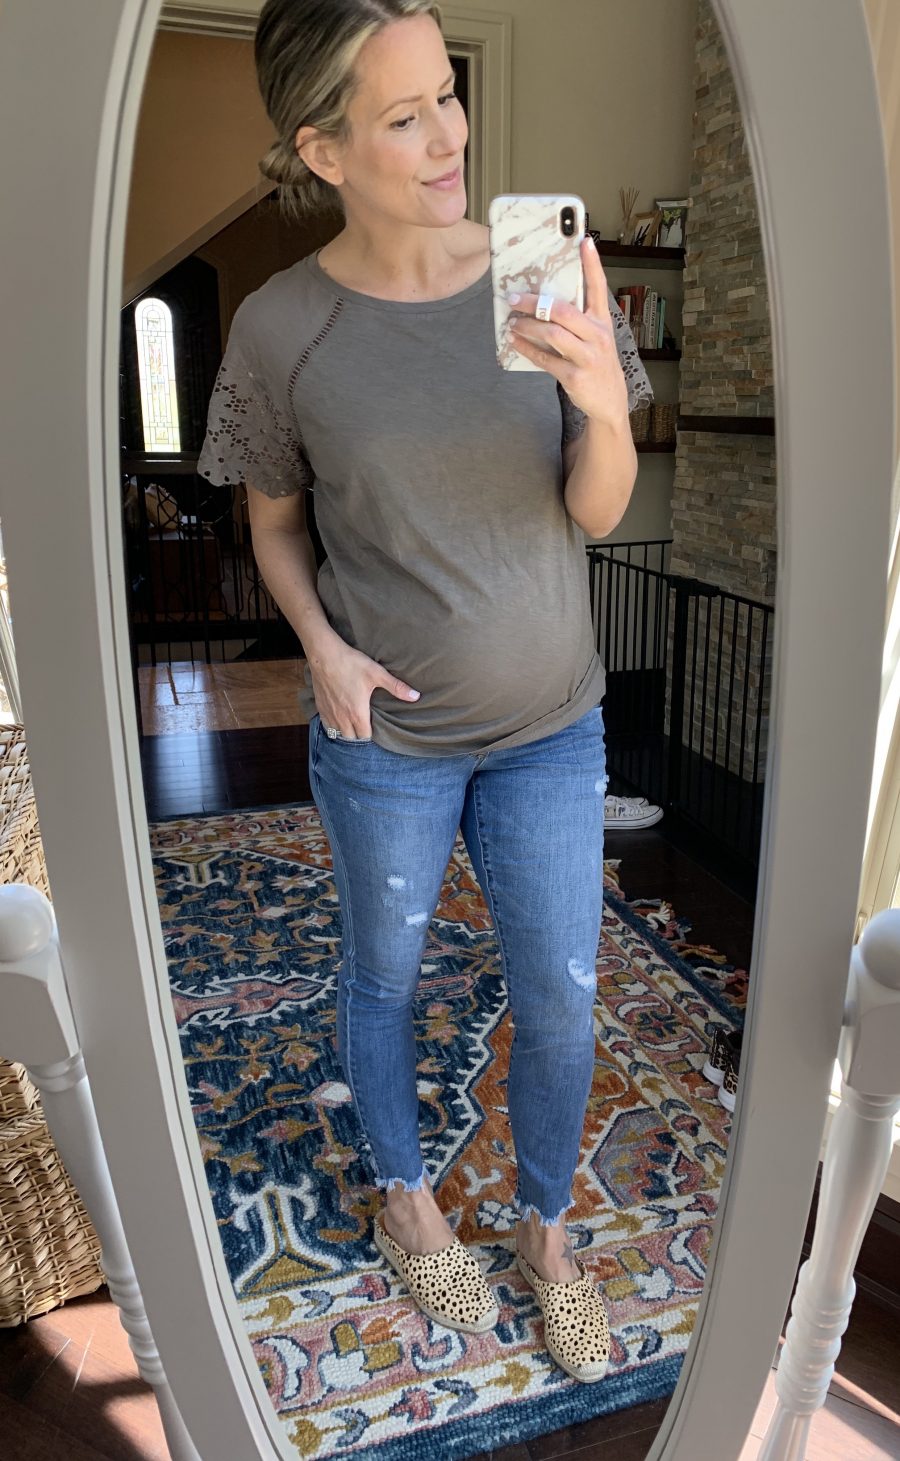 I'm sharing my go-to sites for shopping for maternity clothes that are affordable, trendy, and comfortable for getting through pregnancy! 